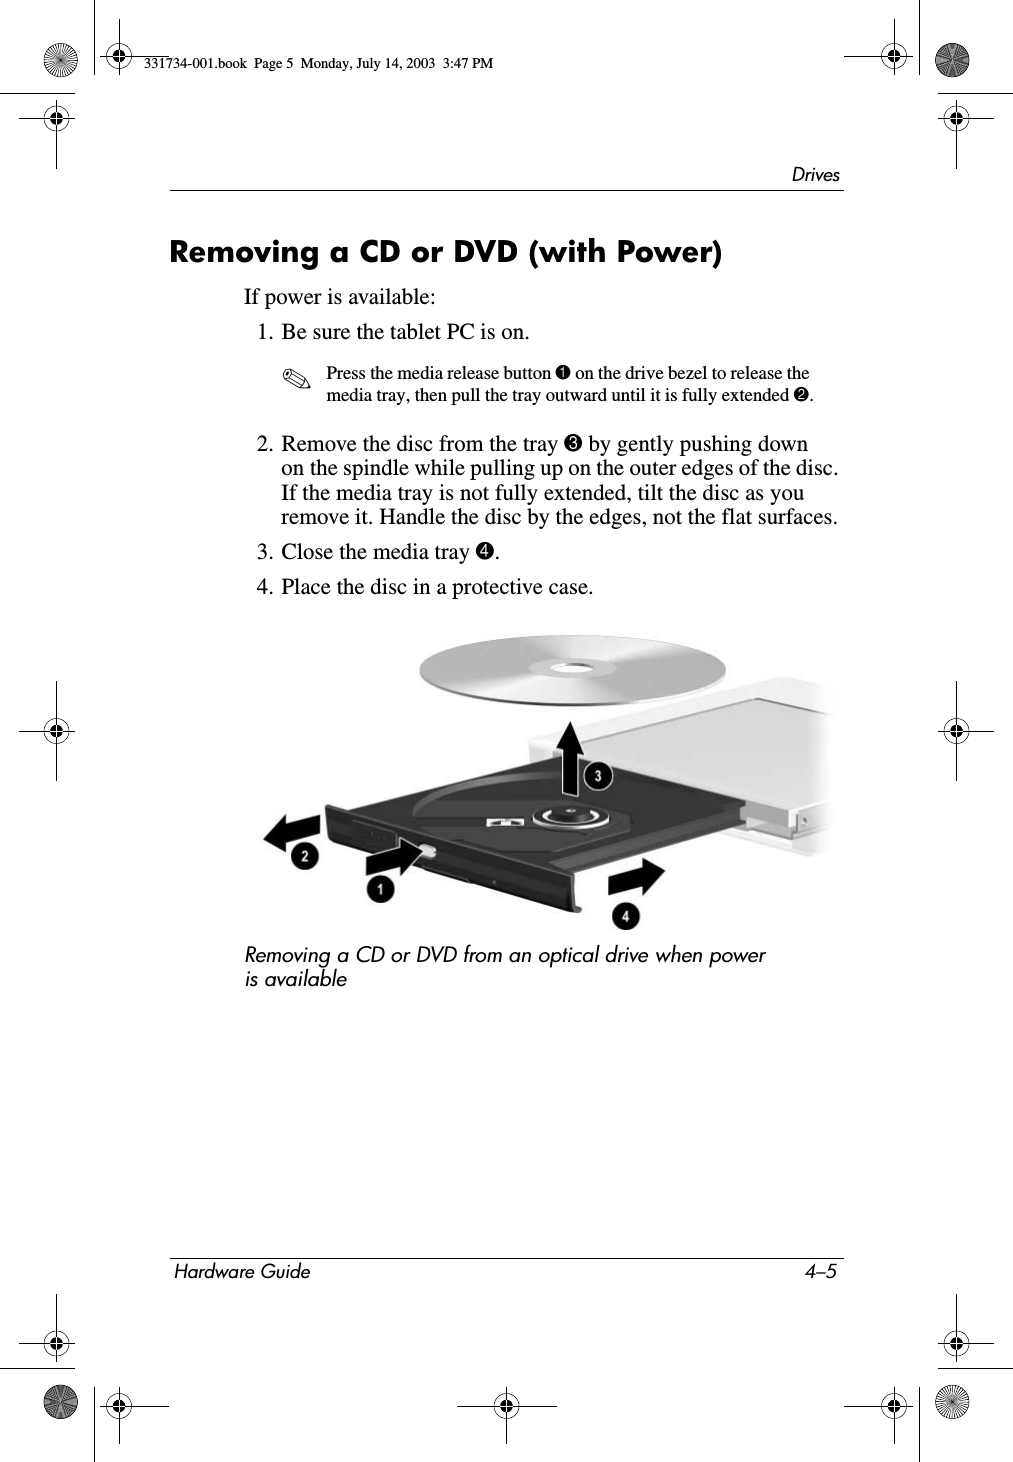 DrivesHardware Guide 4–5Removing a CD or DVD (with Power)If power is available:1. Be sure the tablet PC is on.✎Press the media release button 1 on the drive bezel to release the media tray, then pull the tray outward until it is fully extended 2.2. Remove the disc from the tray 3 by gently pushing down on the spindle while pulling up on the outer edges of the disc. If the media tray is not fully extended, tilt the disc as you remove it. Handle the disc by the edges, not the flat surfaces.3. Close the media tray 4.4. Place the disc in a protective case.Removing a CD or DVD from an optical drive when power is available331734-001.book  Page 5  Monday, July 14, 2003  3:47 PM